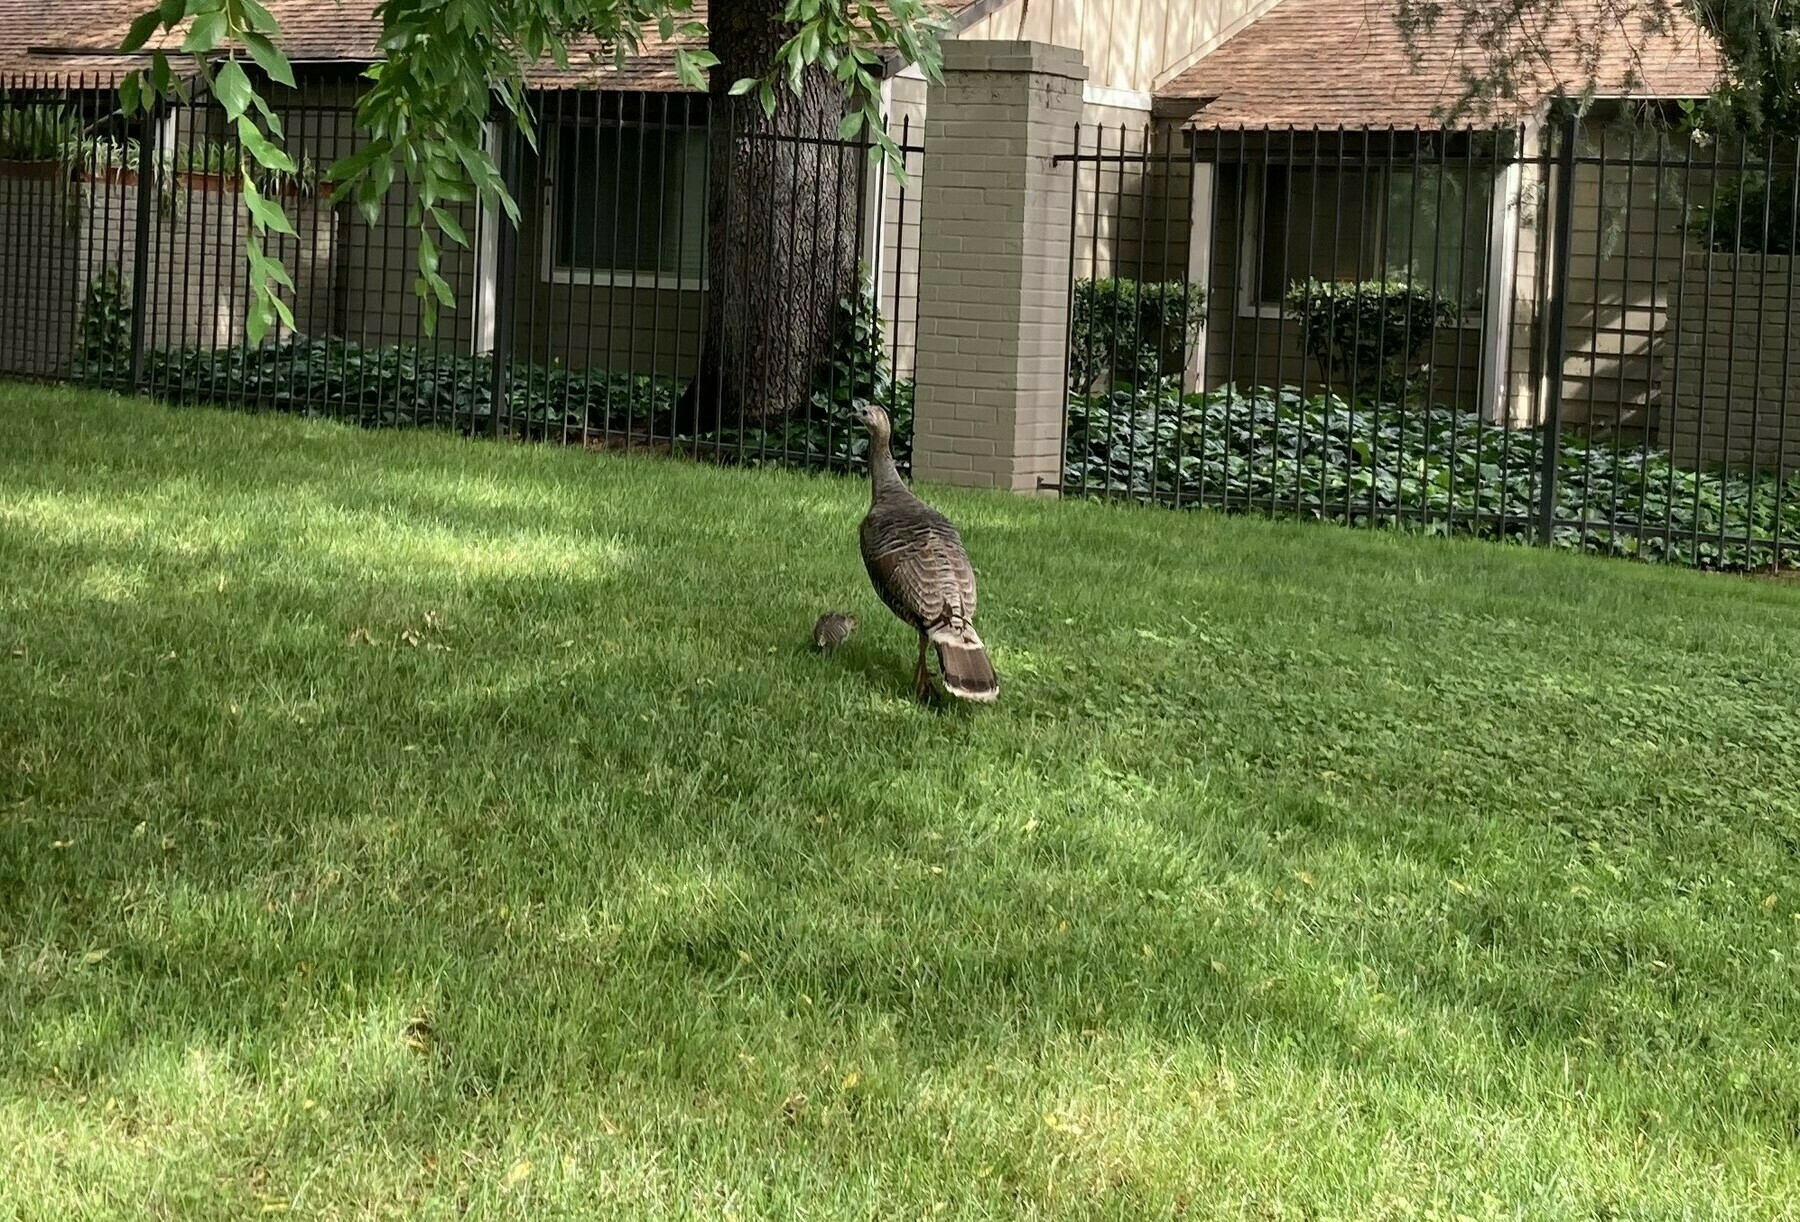 A turkey and it's chick walking on grass under a tree. 